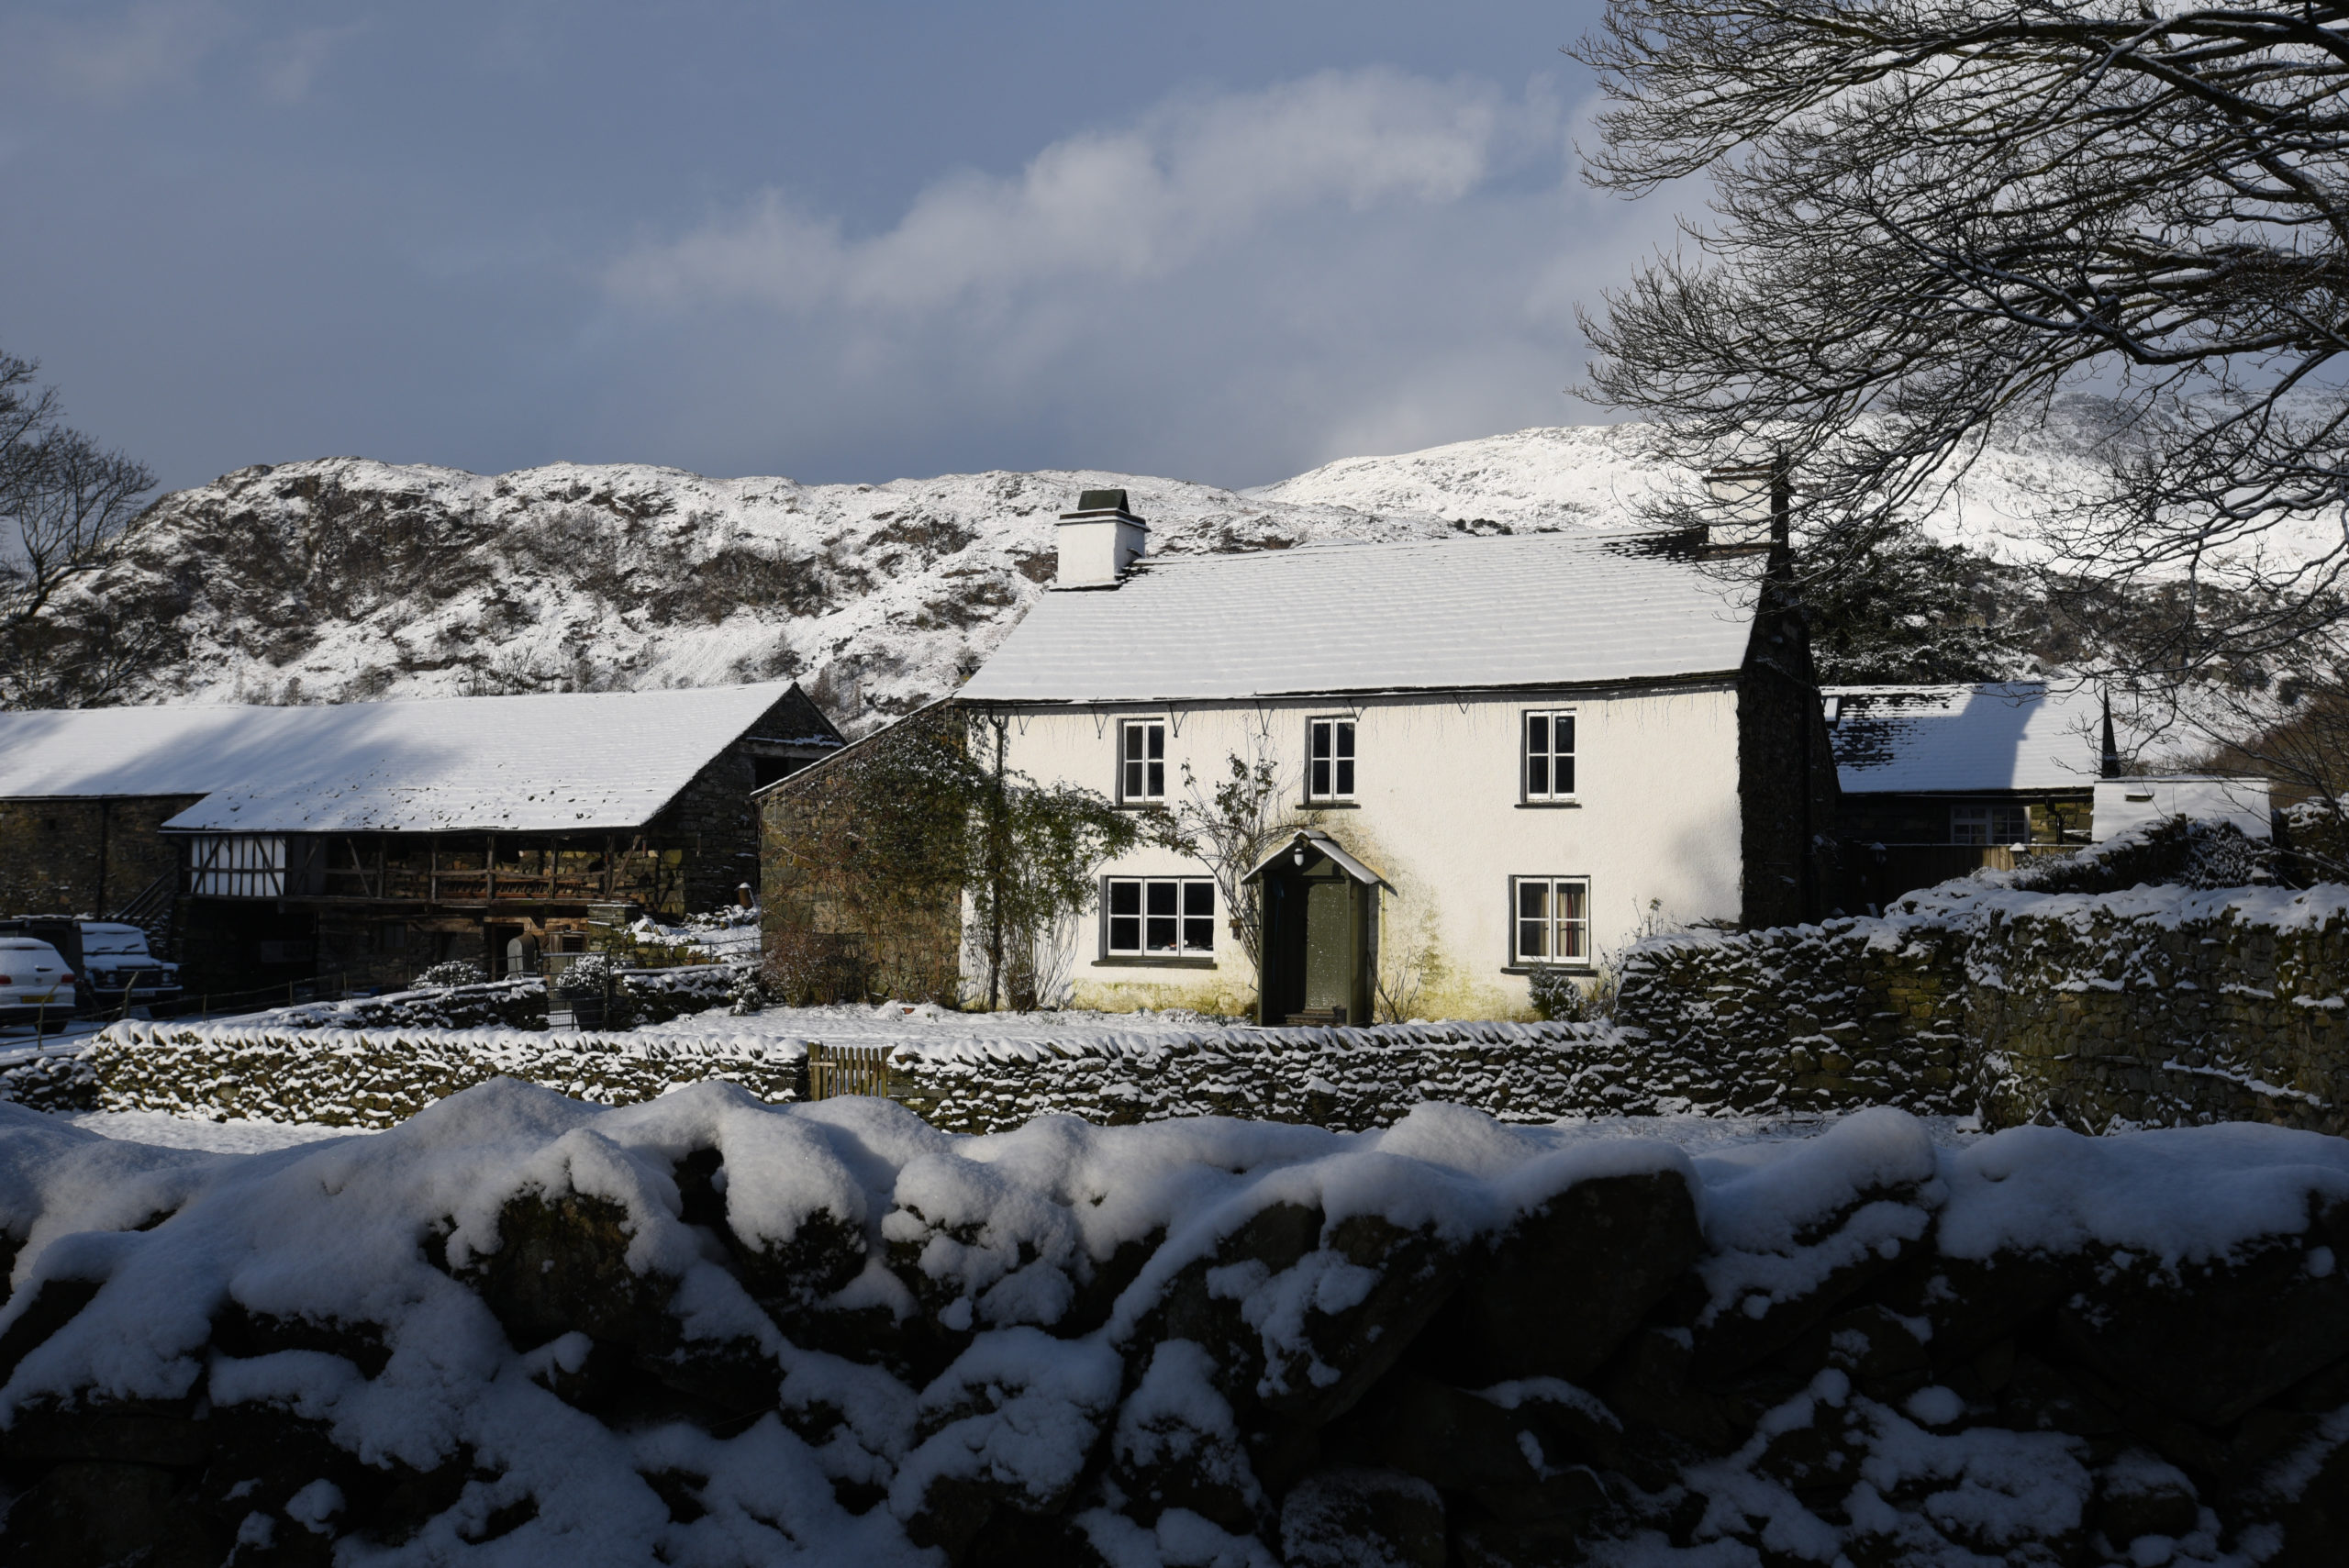 House covered in snow in Cumbria